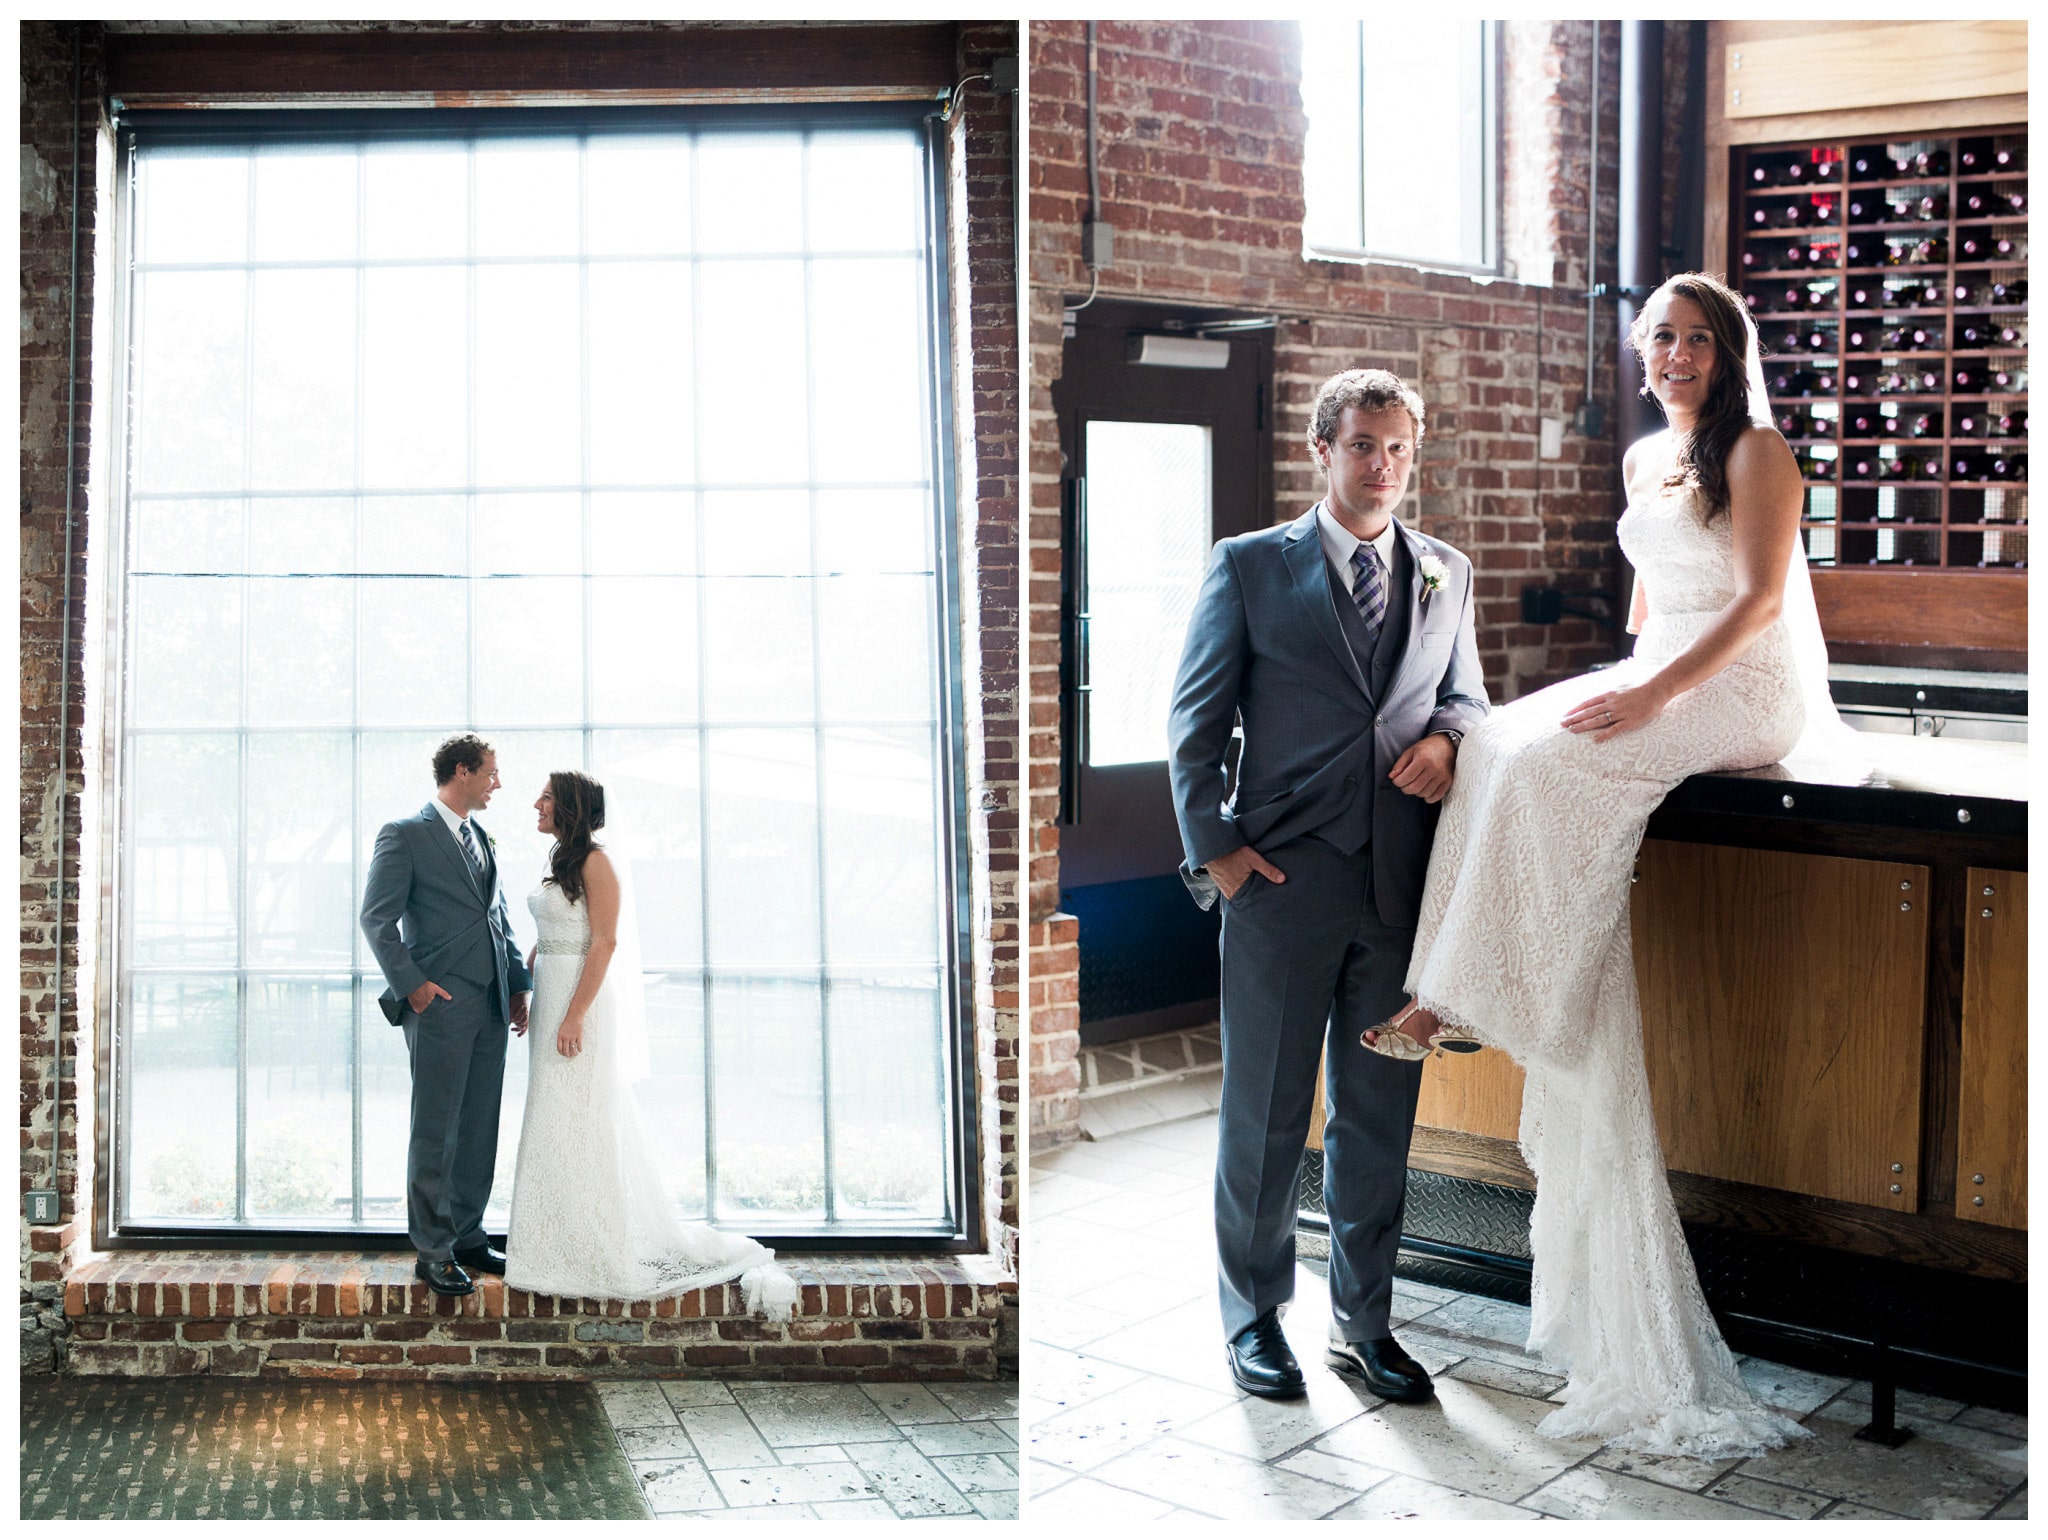 Bride, Brickwork and the Bar, The bride and groom in the brickwork building and bar Venue and Catering – King plow Event Gallery and Bold American Events Decor and flowers – Stylish Stems Music and Band – Seven Sharp Nine Transportation – Georgia Trolley Photographer One Life Photography